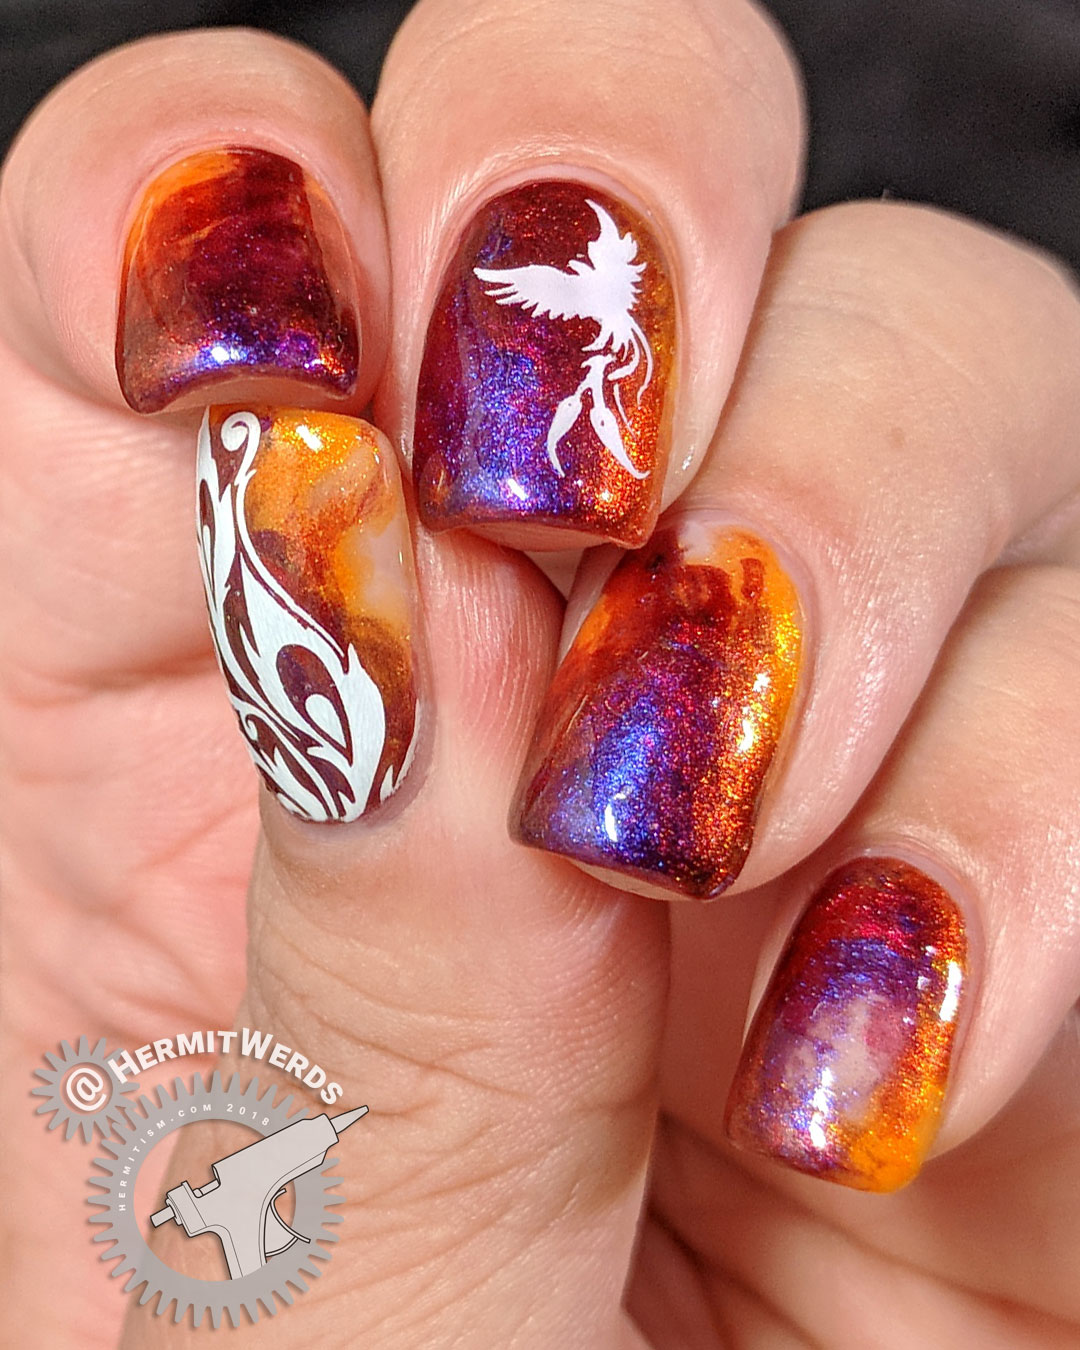 Dance of the Firebird - Hermit Werds - flame-colored duochrome nail art design with a firebird and feathers stamped on top